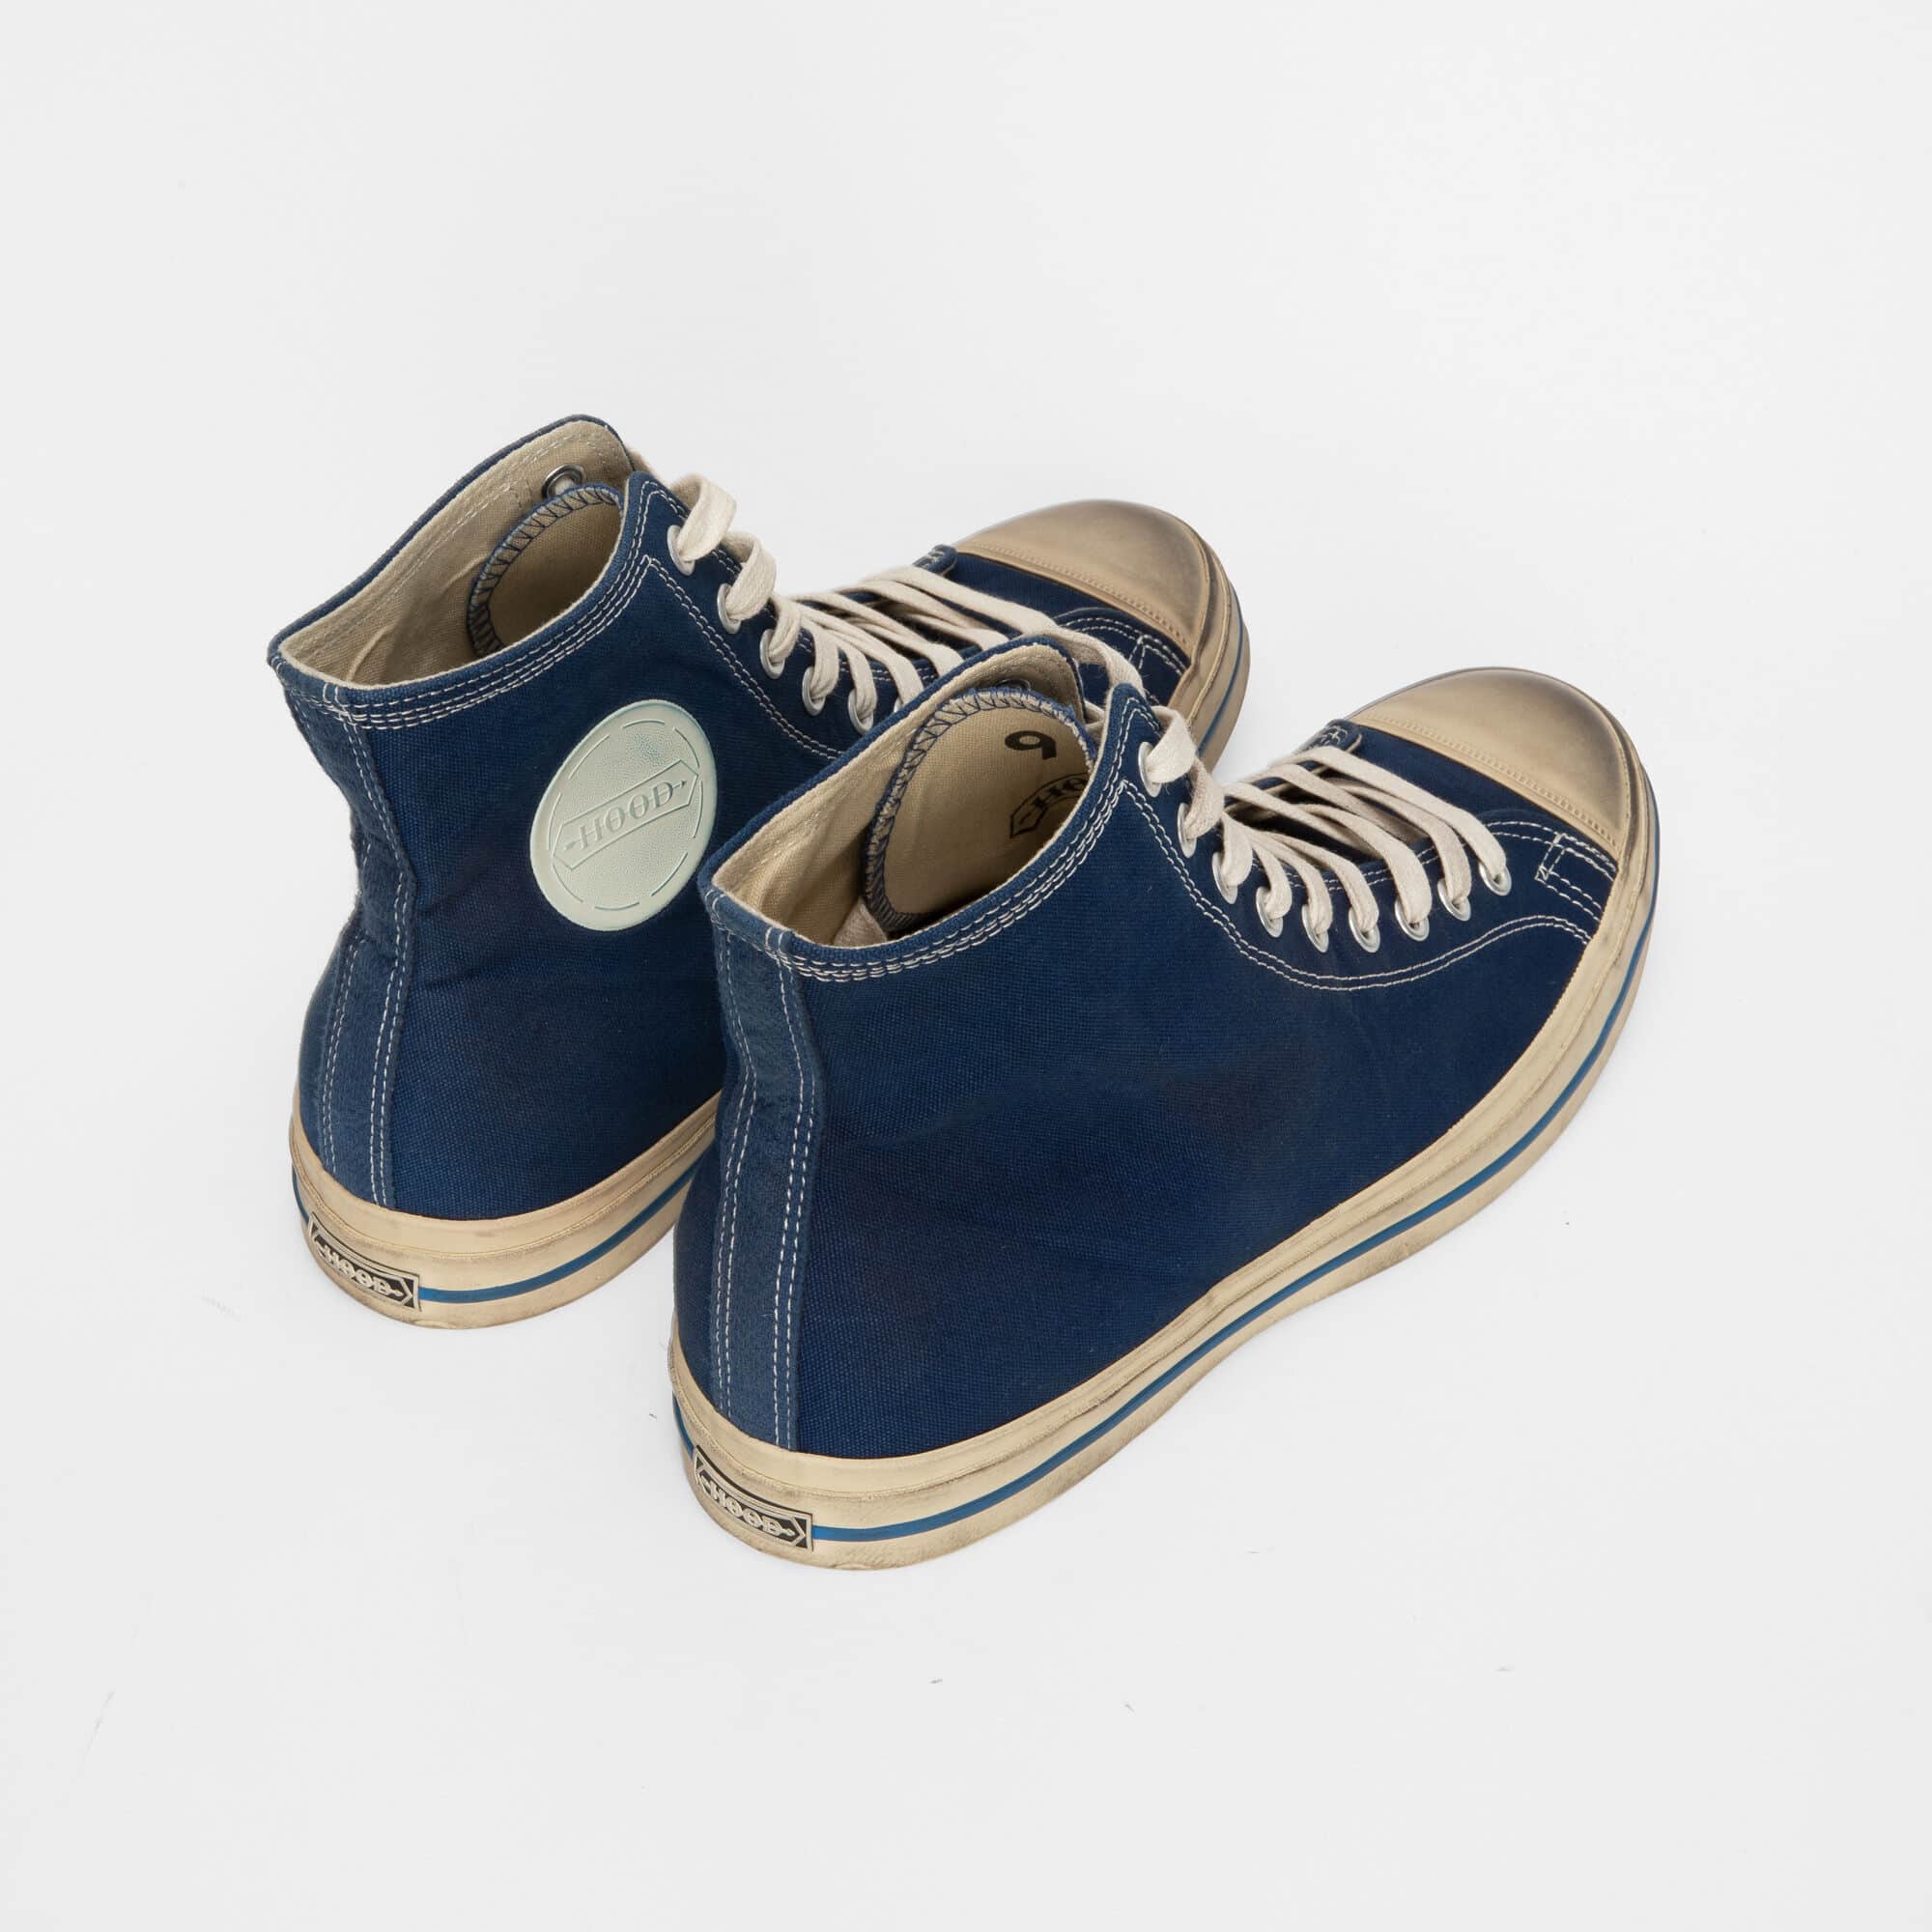 HOOD 1955 Conference High Cut Sneakers Loyal Blue